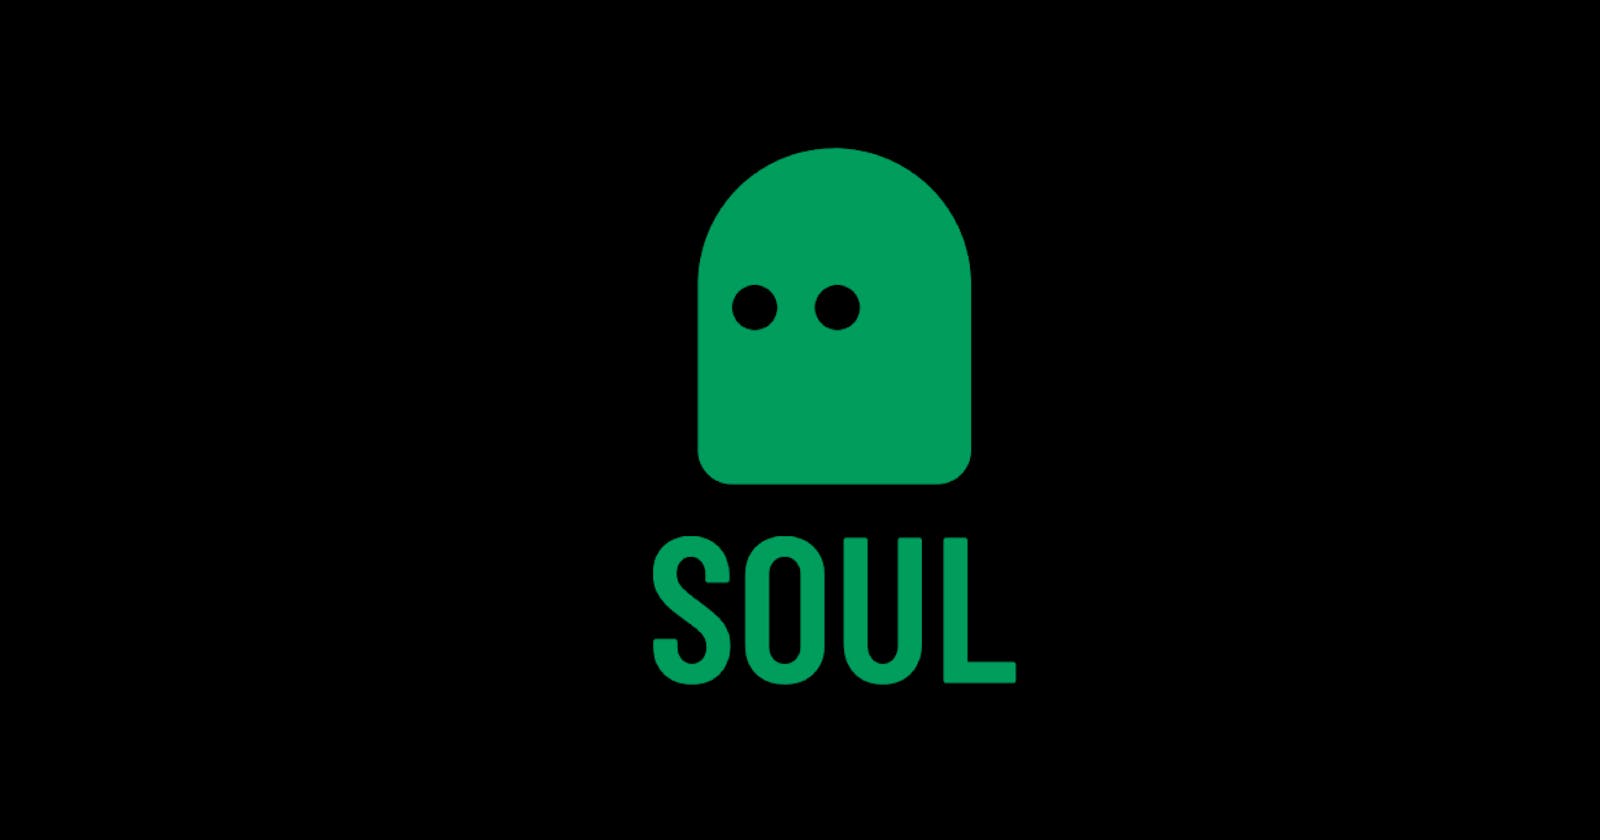 Soul RESTful and realtime server for SQLite, now with Authentication!